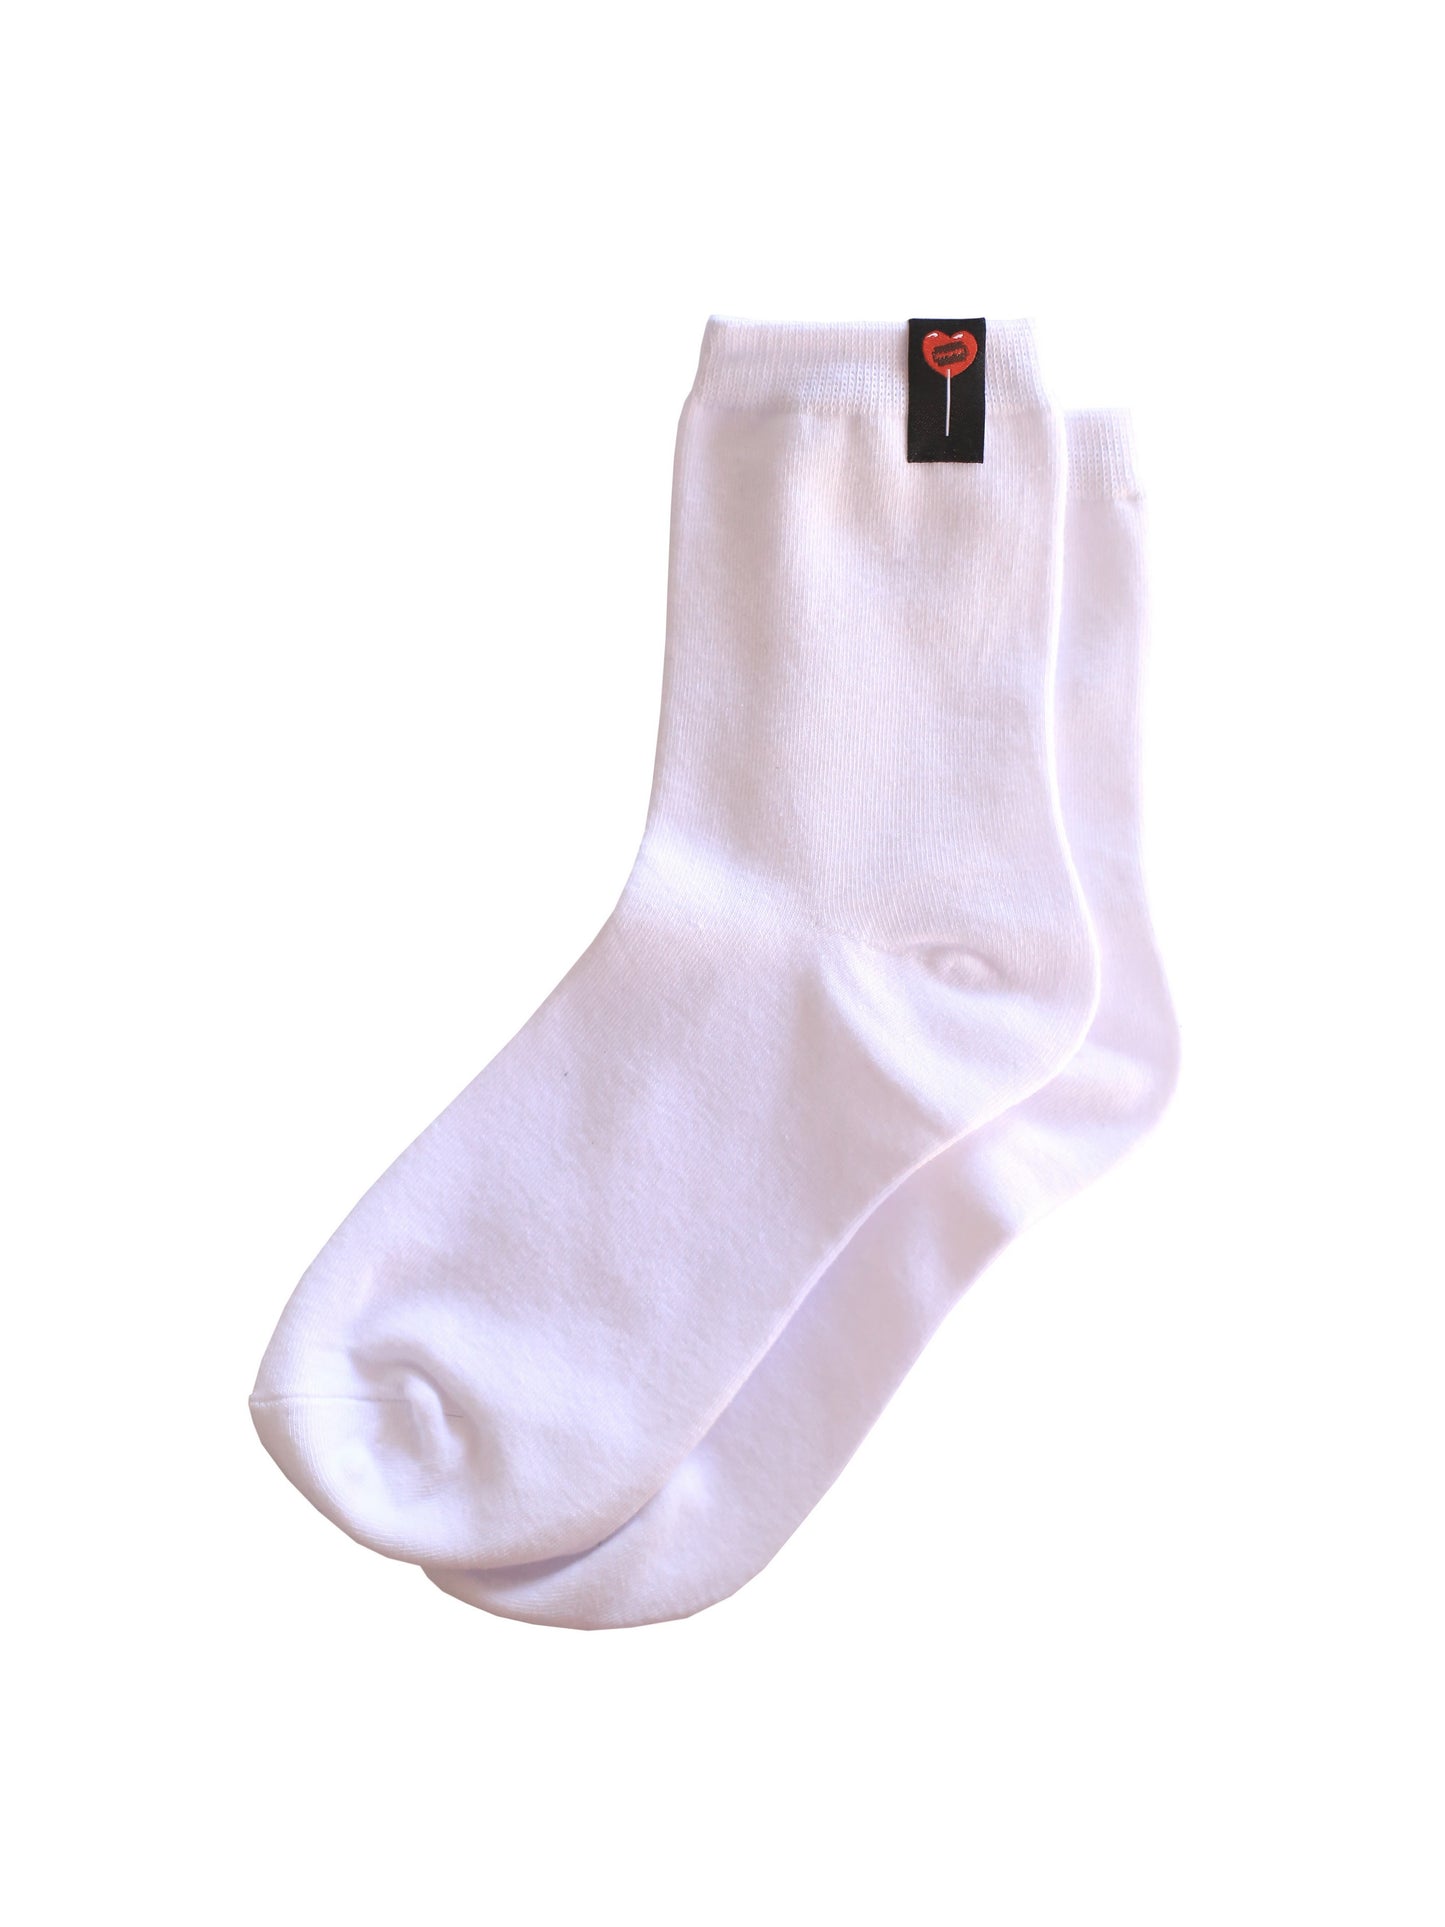 Chaussettes blanches logo coeur